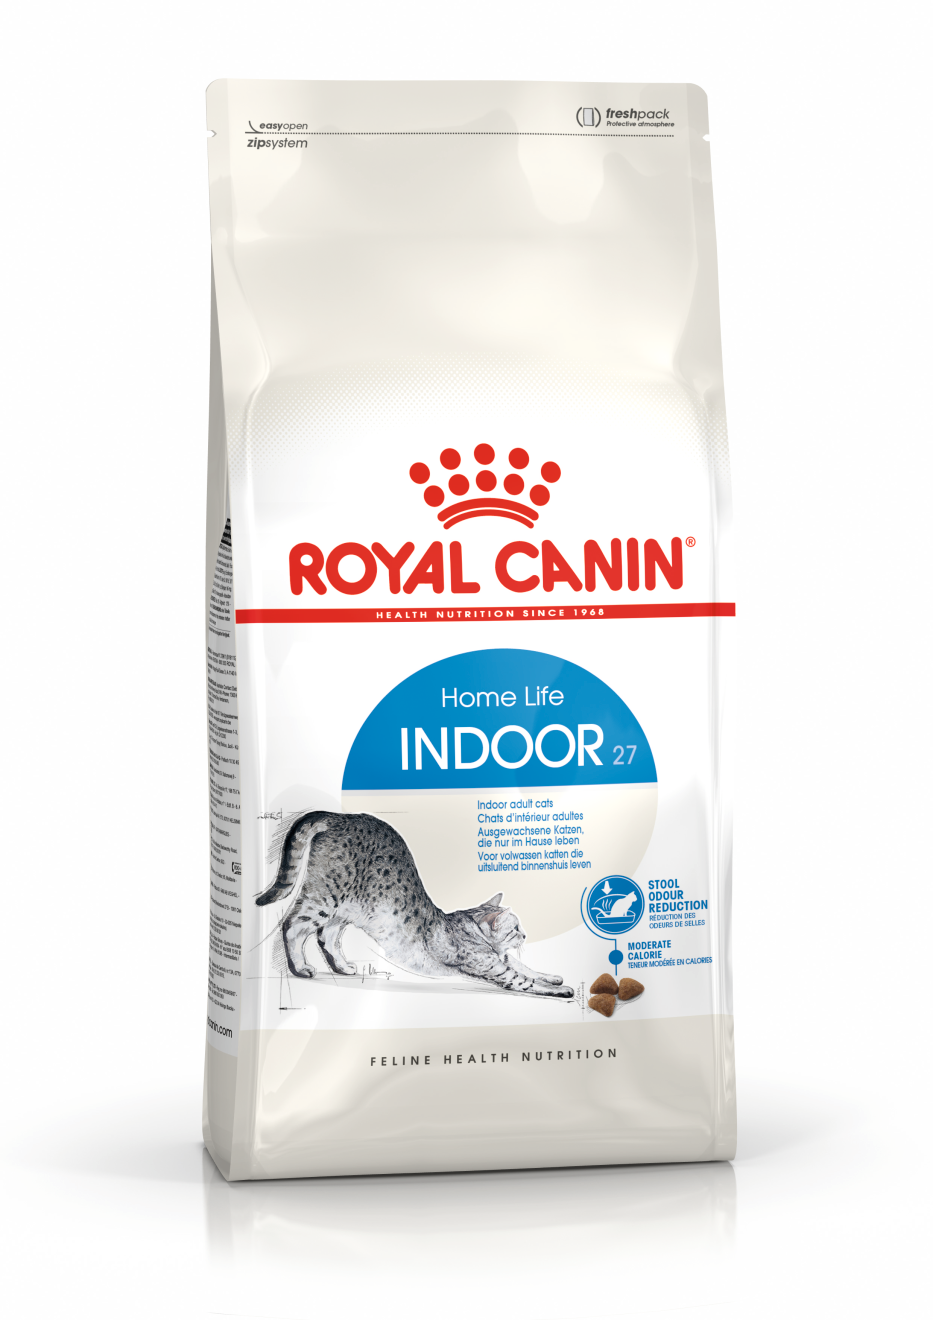 Royal Canin Home Life Indoor 27 Adult Cat